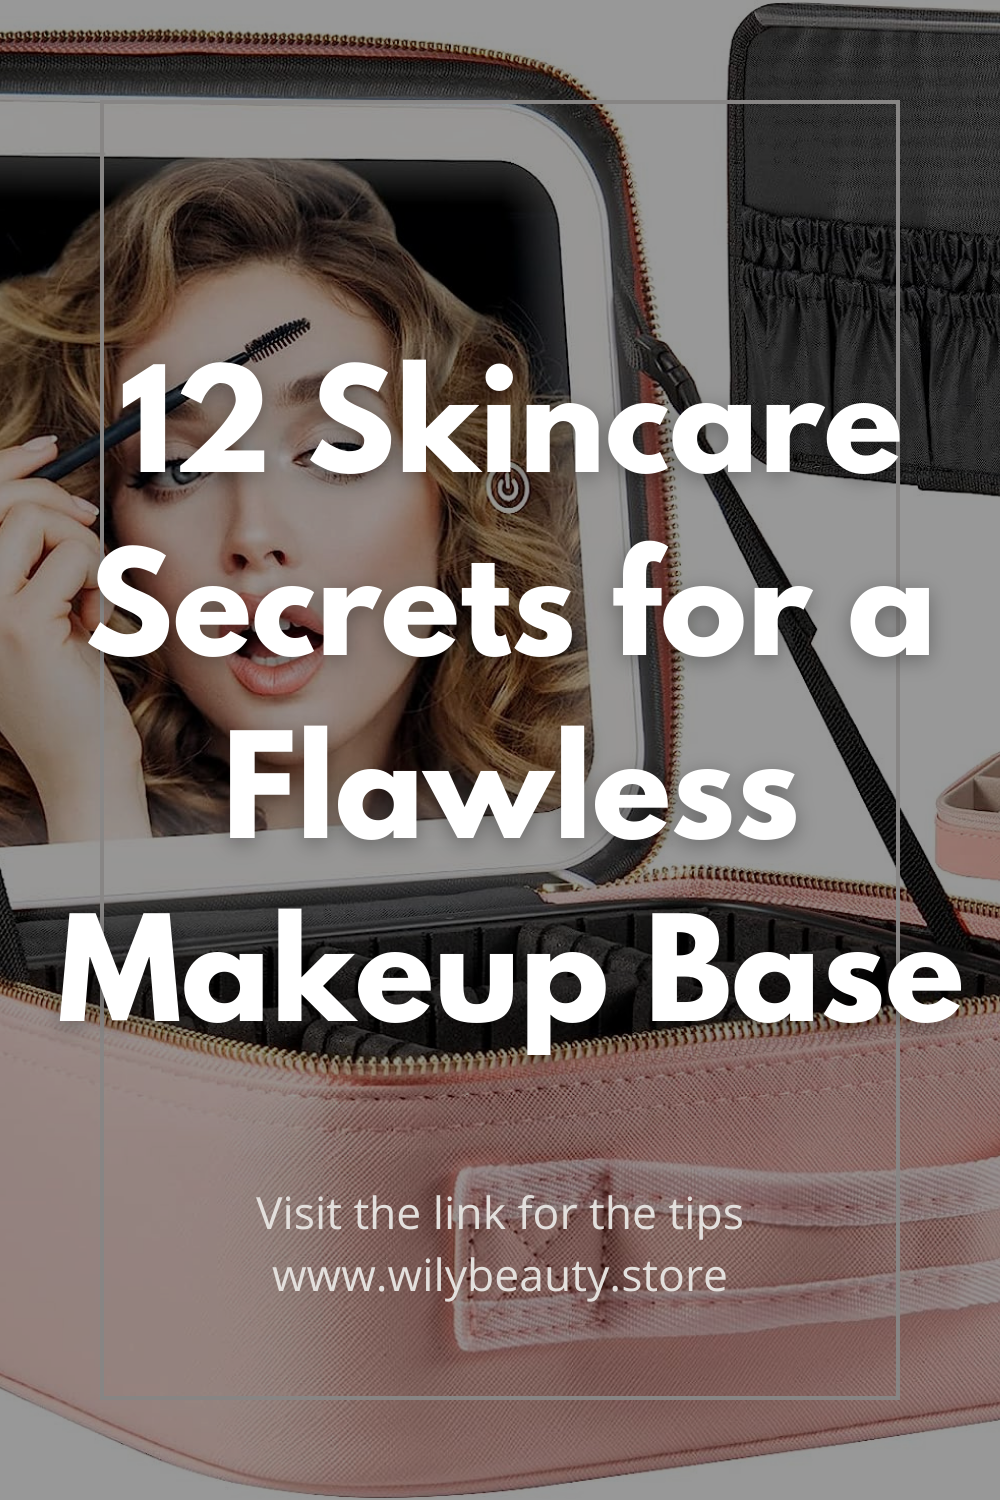 12 Skincare Secrets for a Flawless Makeup Base